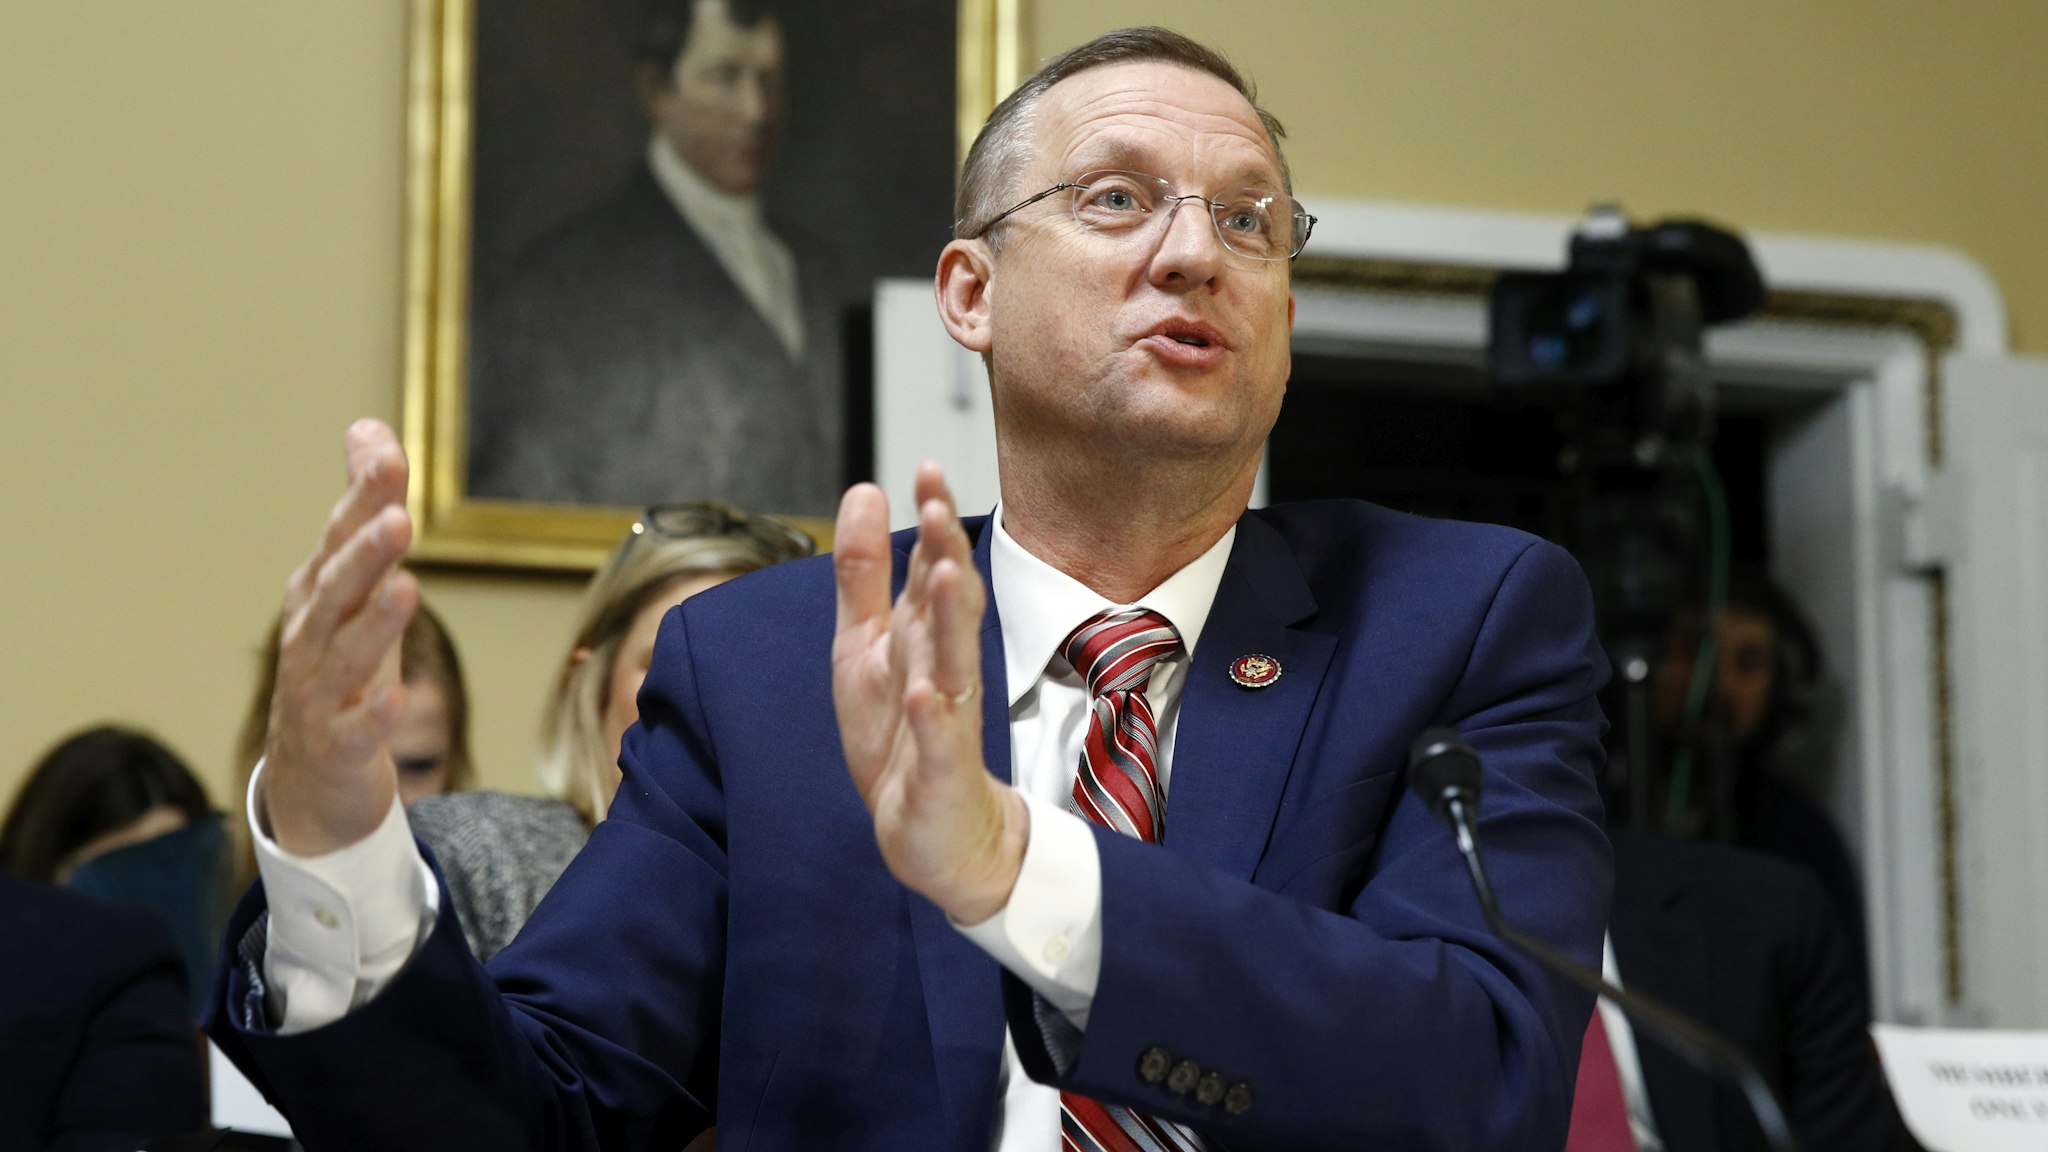 WASHINGTON, DC - DECEMBER 17: House Judiciary Committee ranking member Rep. Doug Collins, R-Ga., speaks during a meeting of the house committee on rules to consider H. Res. 755 Impeaching Donald John Trump, President of the United States, for high crimes and misdemeanors on Capitol Hill on December 17, 2019 in Washington, DC.